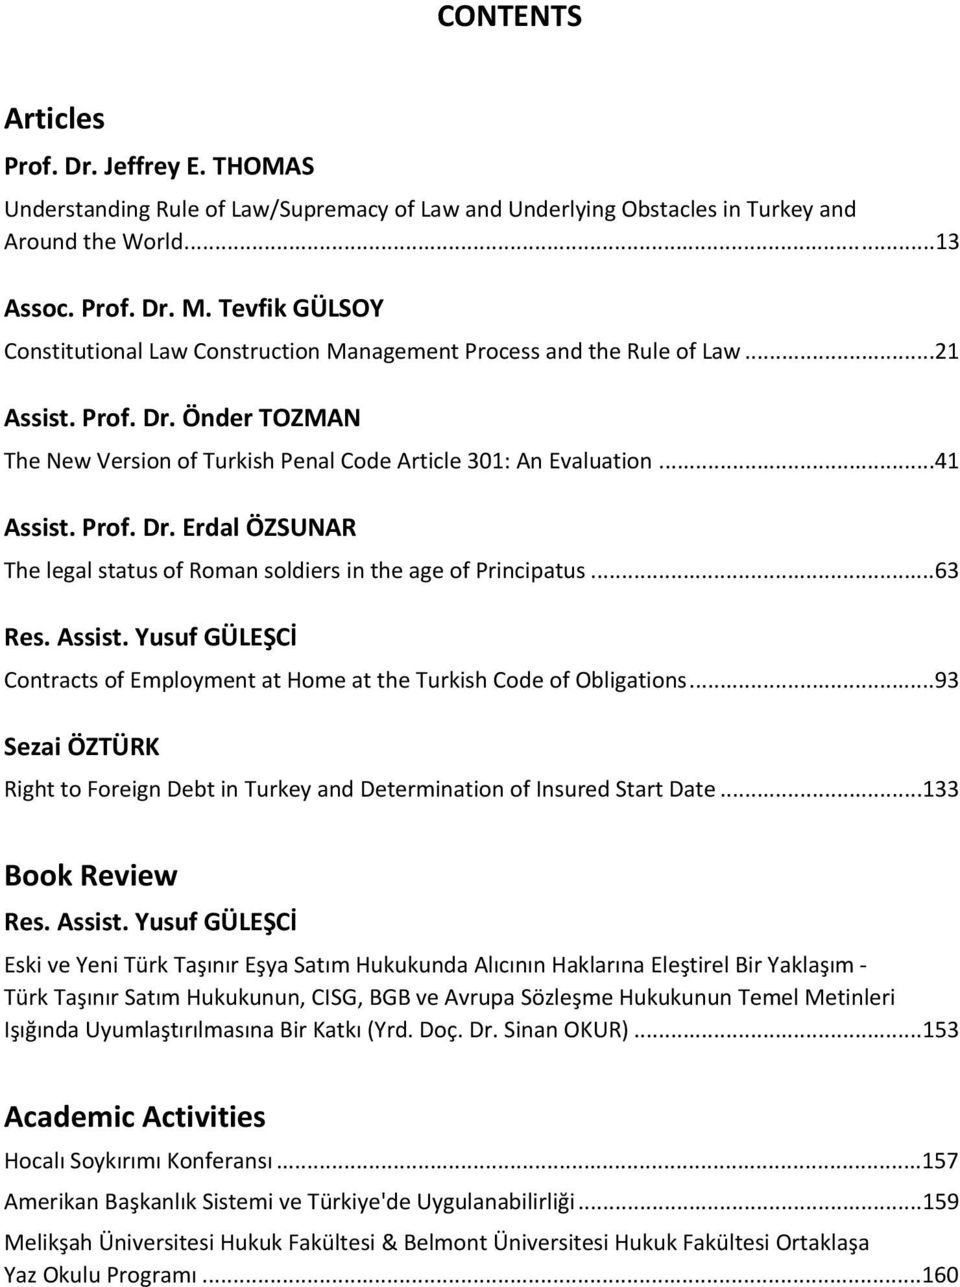 Prof. Dr. Erdal ÖZSUNAR The legal status of Roman soldiers in the age of Principatus... 63 Res. Assist. Yusuf GÜLEŞCİ Contracts of Employment at Home at the Turkish Code of Obligations.